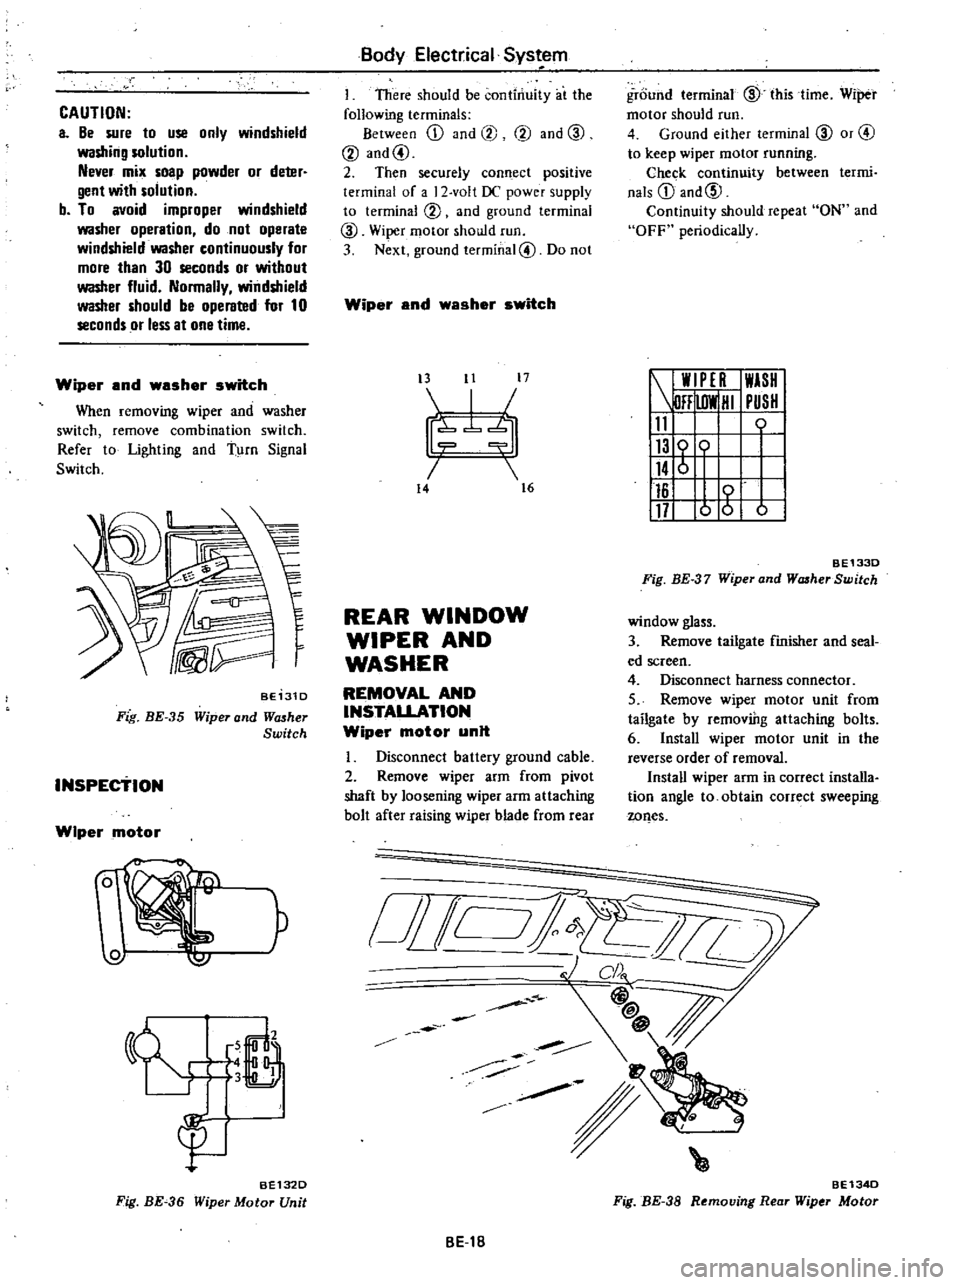 DATSUN 210 1979  Service Manual 
CAUTION

a 
Be 
sure 
to 
use

only 
windshield

washing 
solution

Never 
mix

soap 
powder 
or 
deter

gent 
with 
solution

b 
To 
avoid

improper 
windshield

washer

operation 
do 
not

operate
